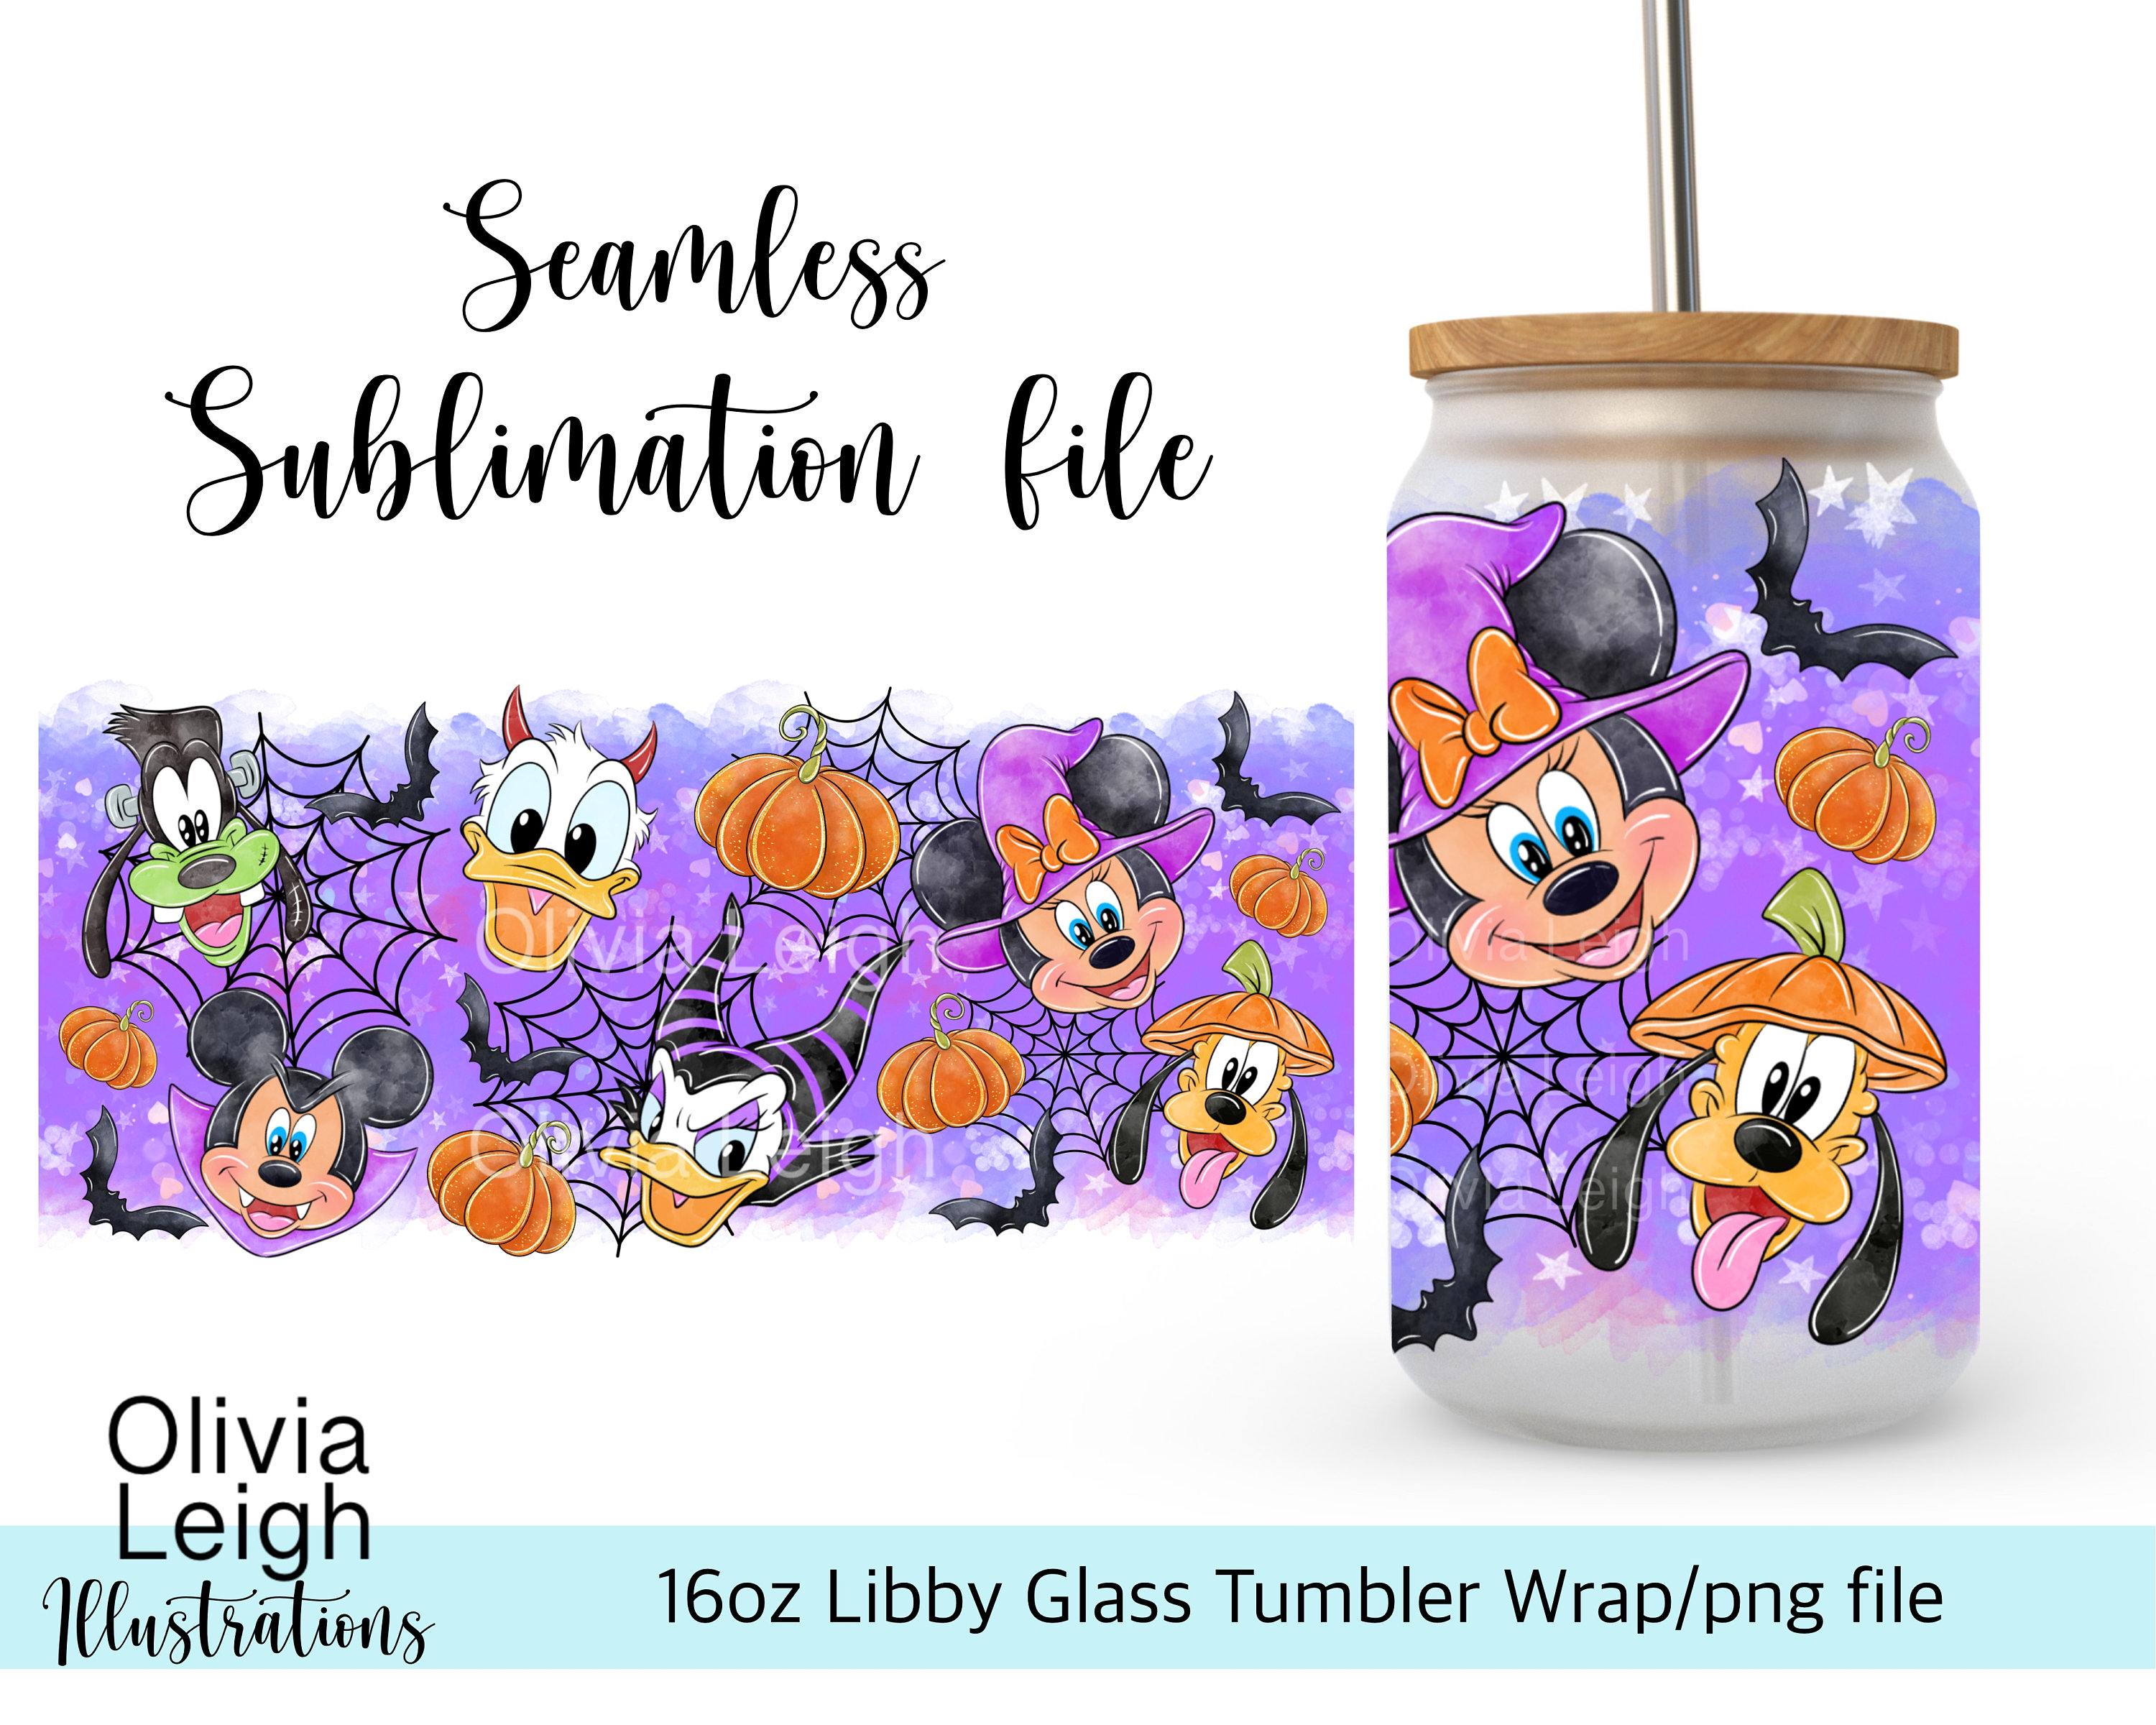 Disney Mickey & Minnie Mouse Cup Wrap, Ready to use Glass Cup Wrap